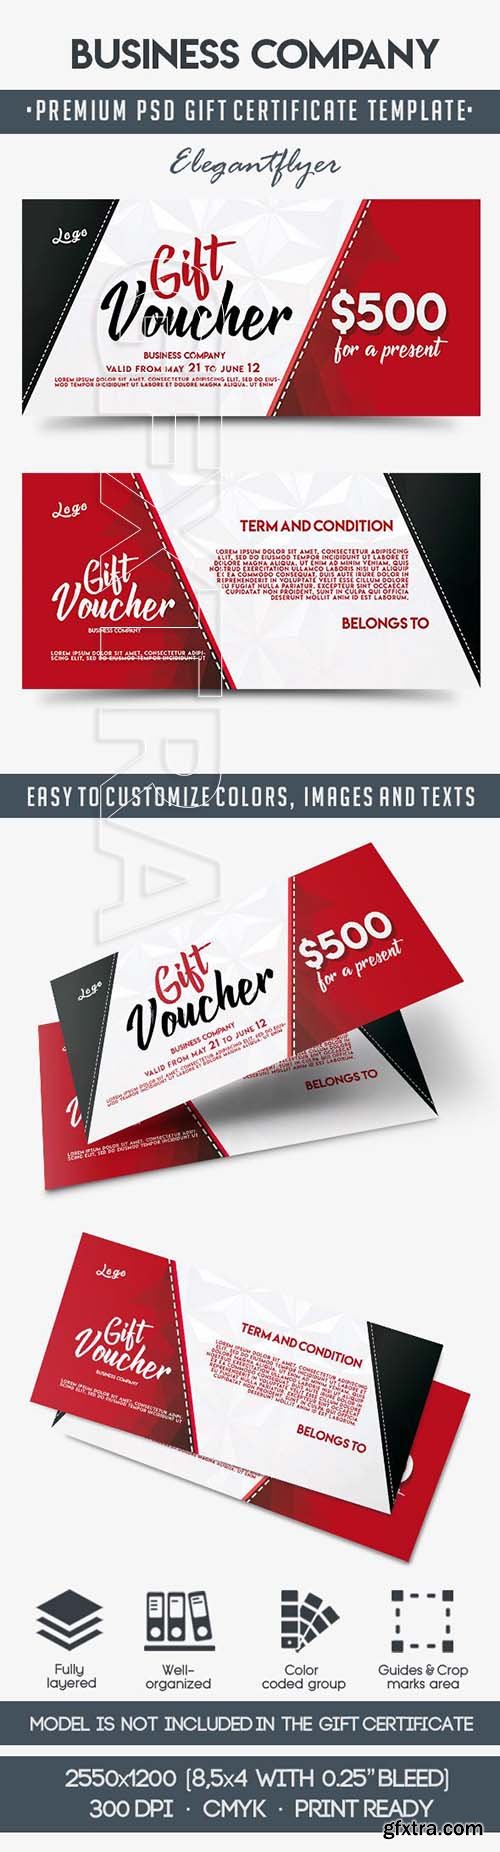 Business Company Gift Certificate Template